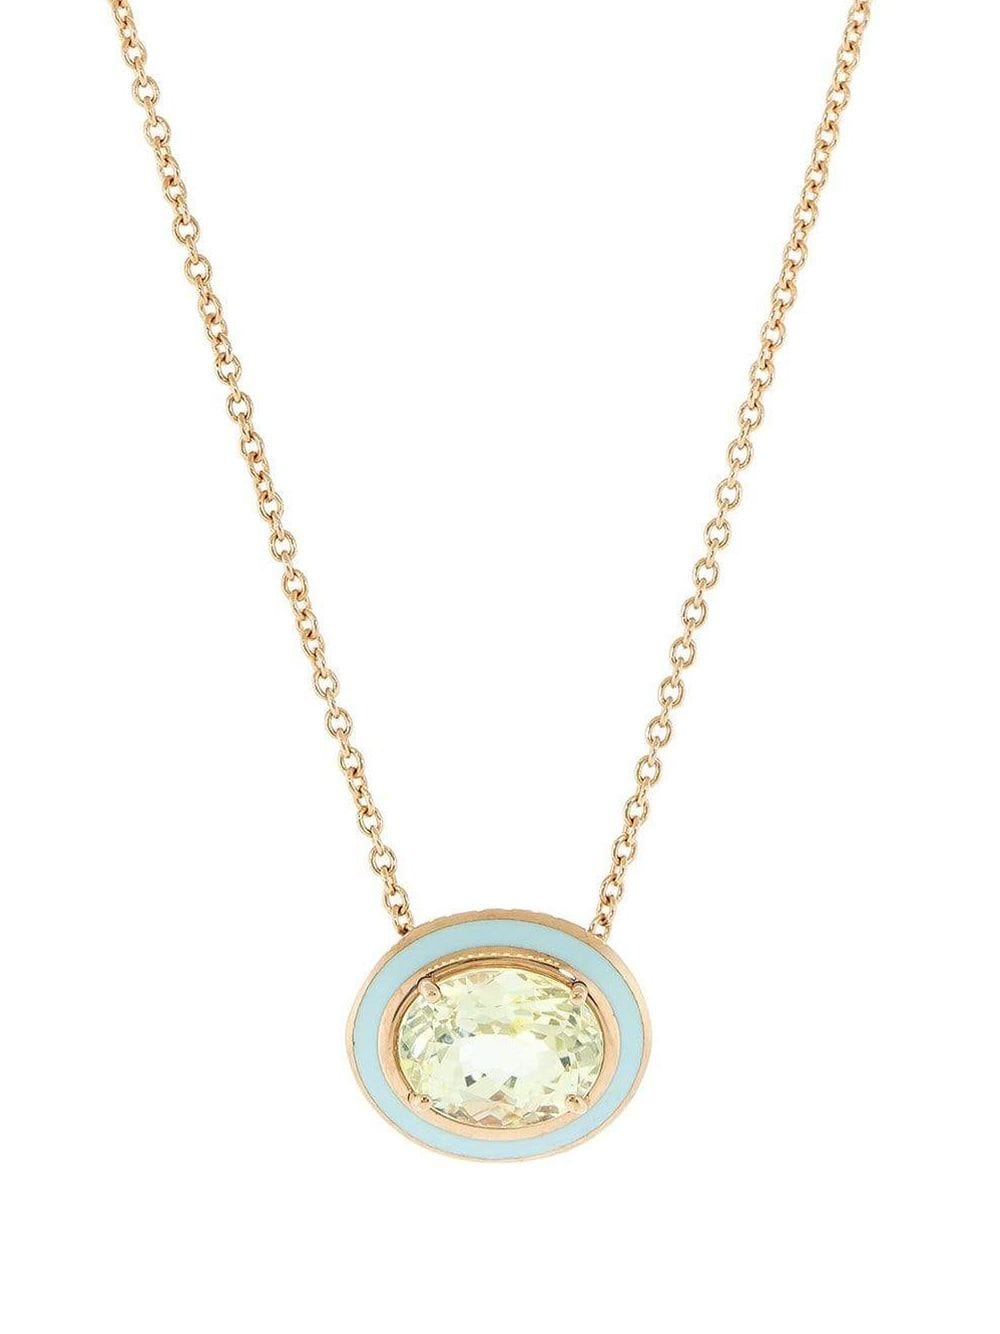 18kt rose gold, yellow sapphire and light blue enamel necklace